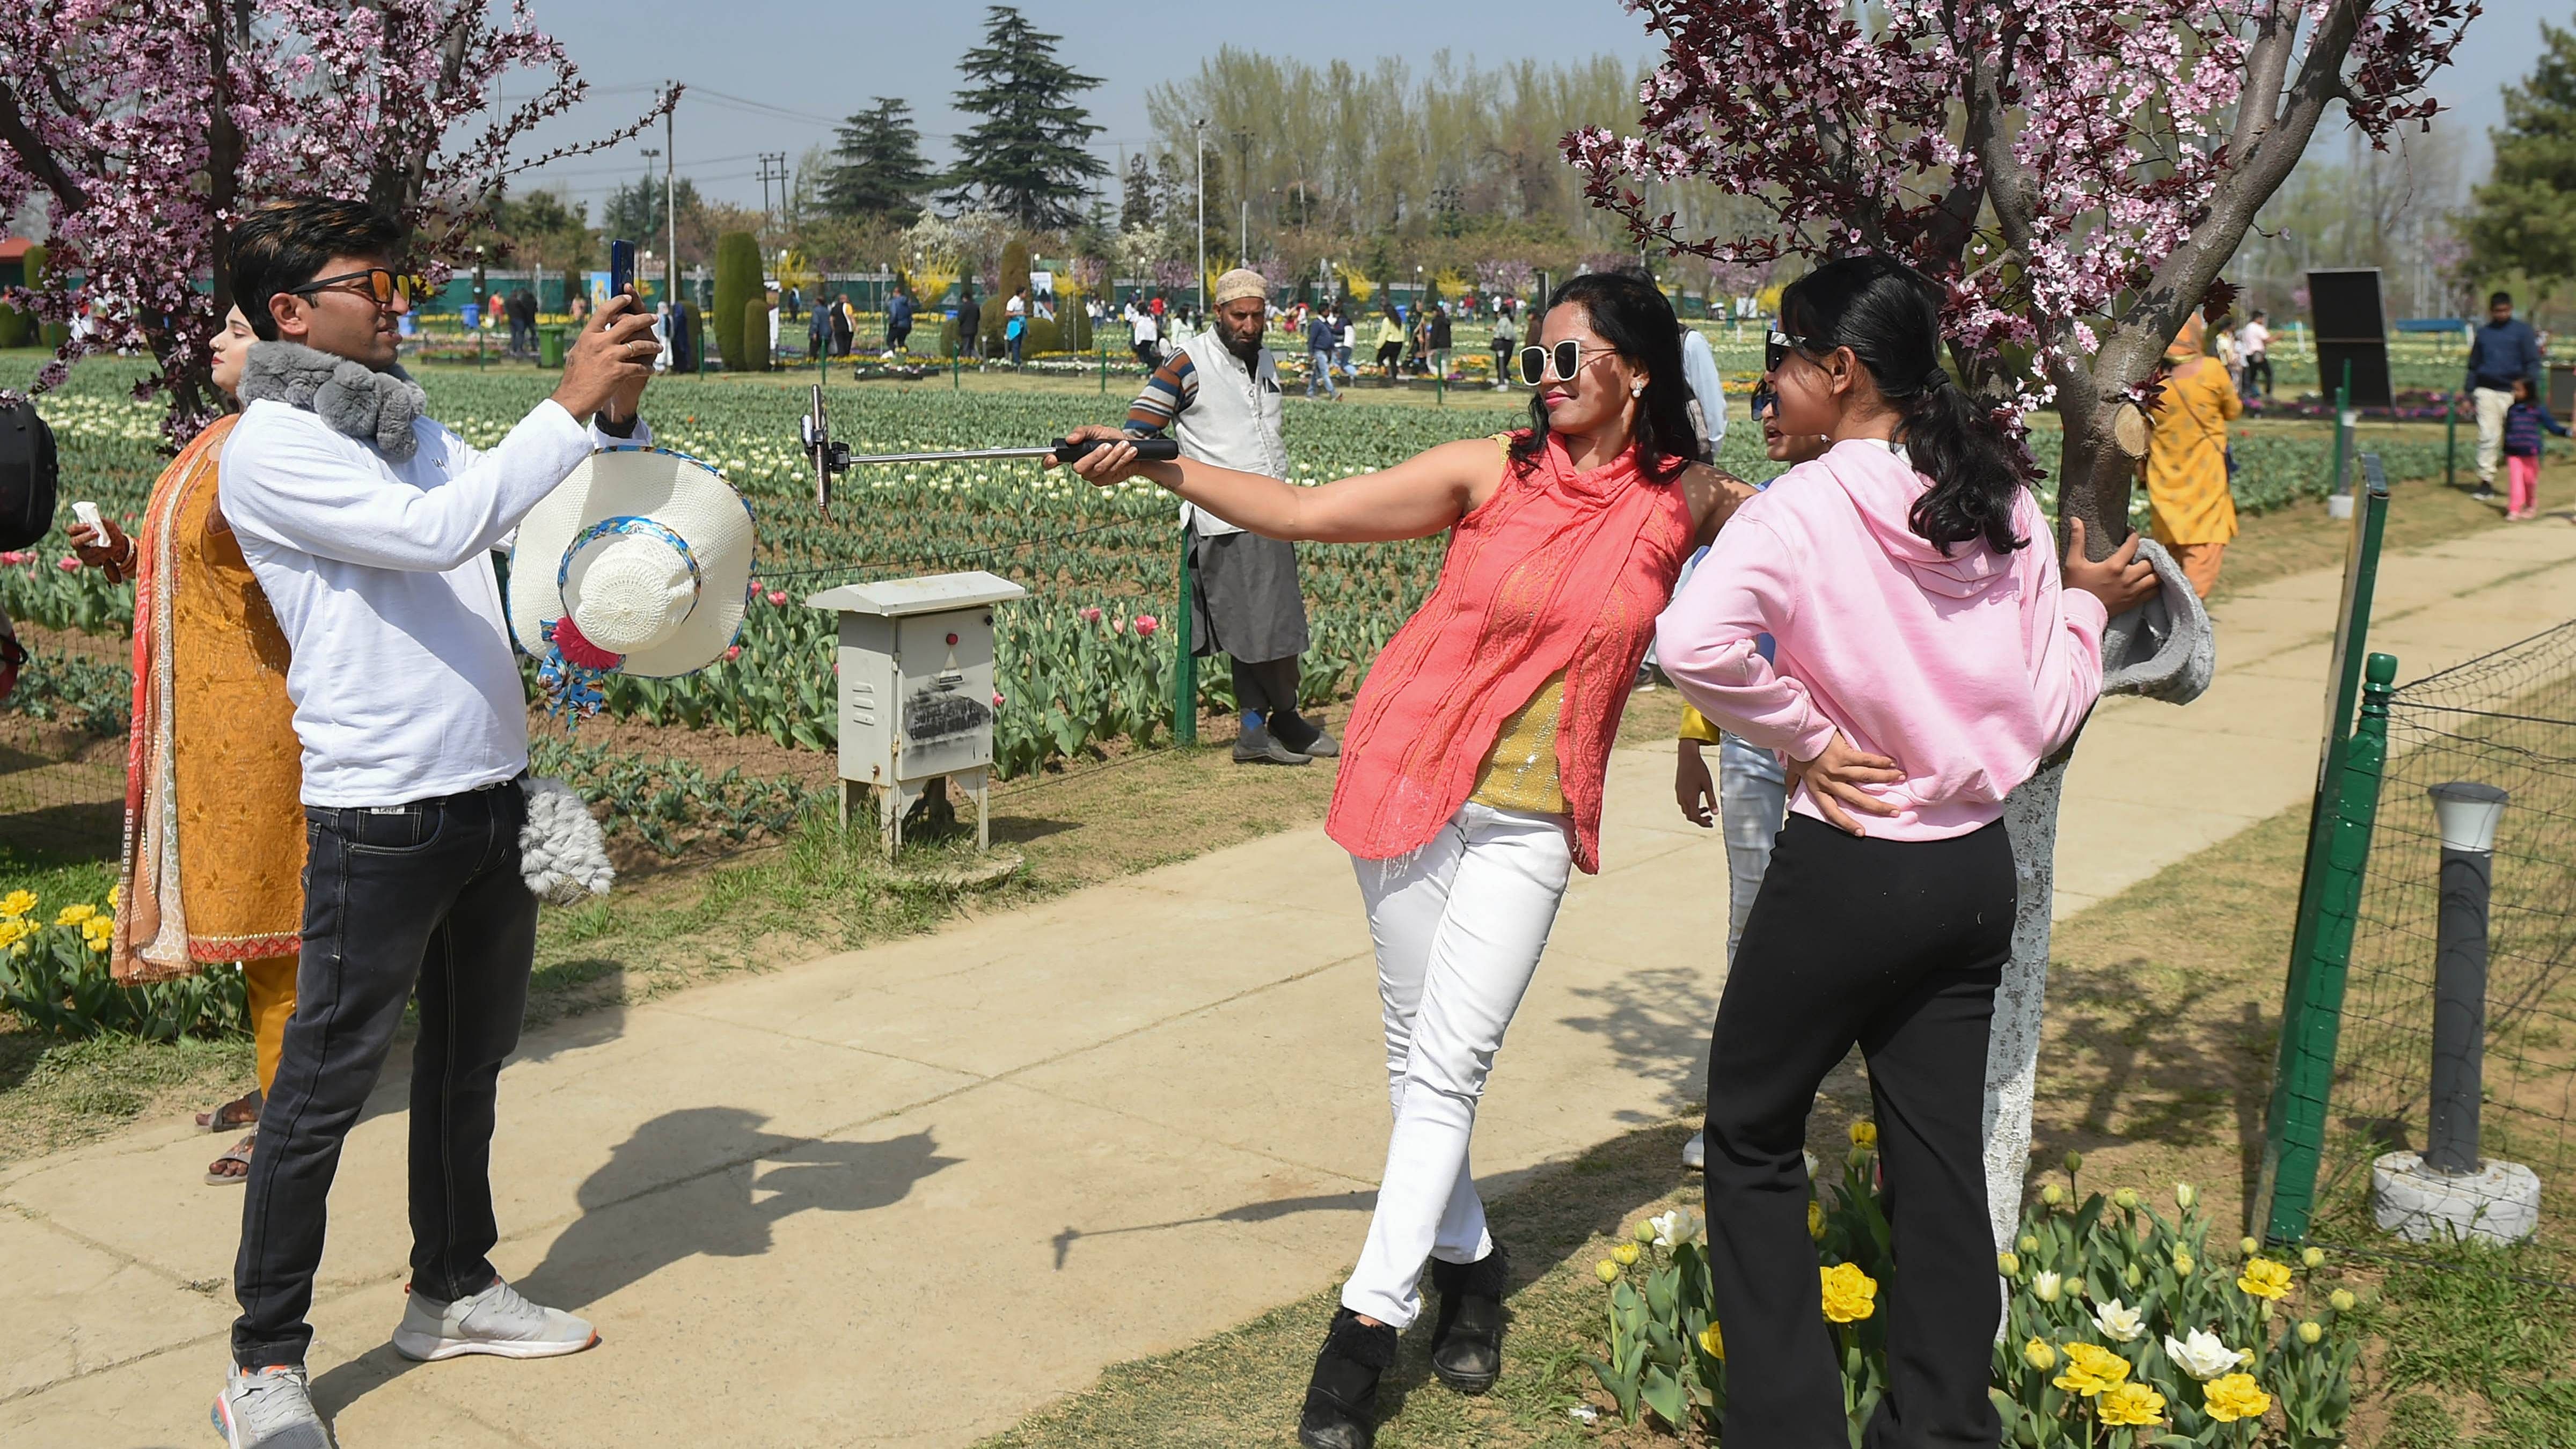 1.8 lakh tourist arrivals were recorded in the Valley in March this year. Credit: PTI File Photo